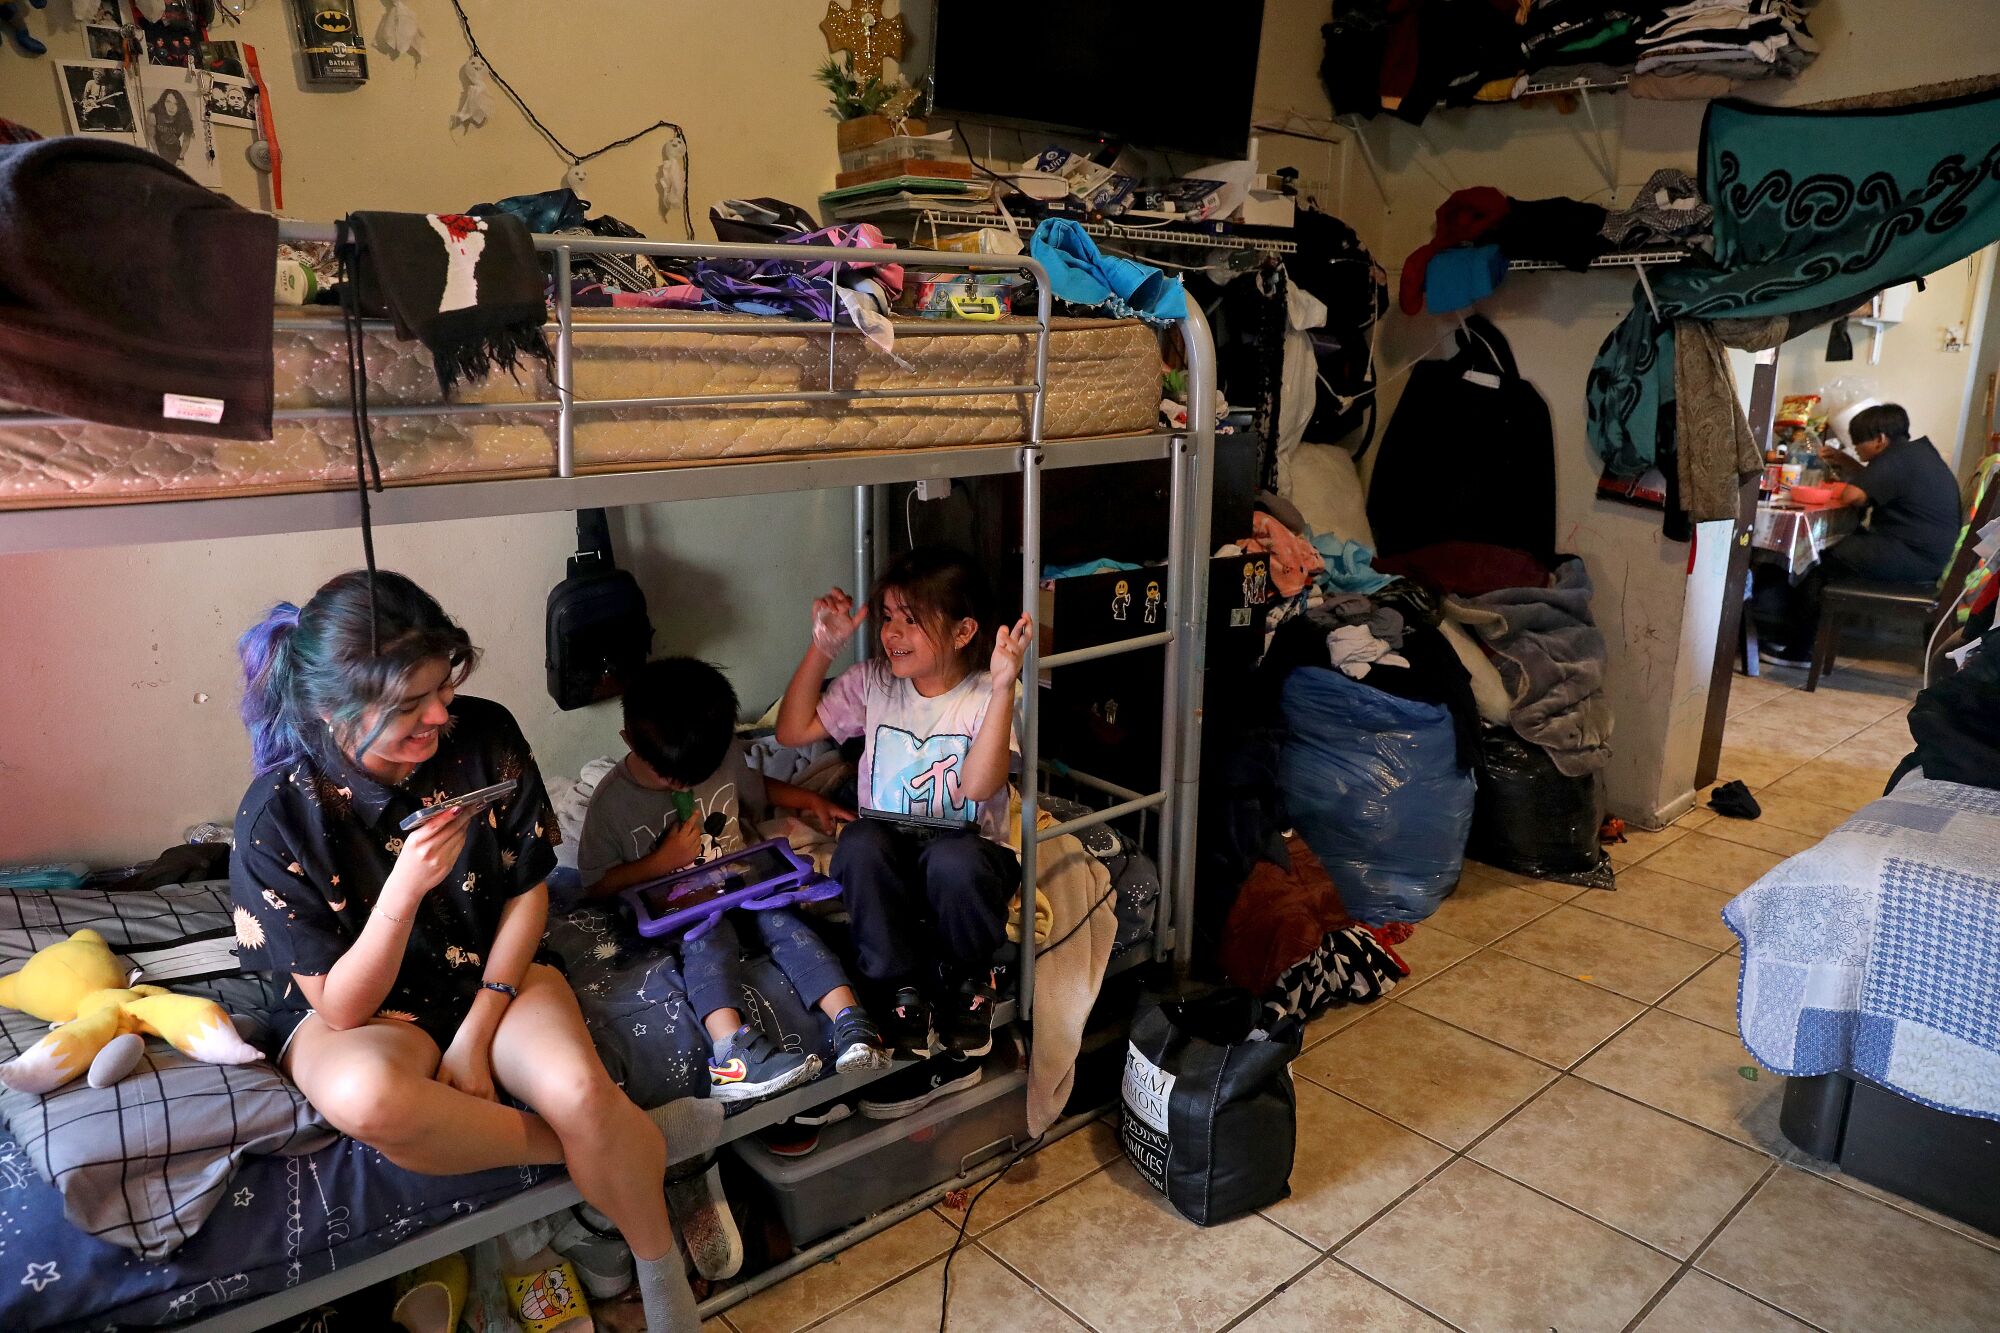 People play video games on the bunk beds in the family's one-bedroom apartment in Pico-Union